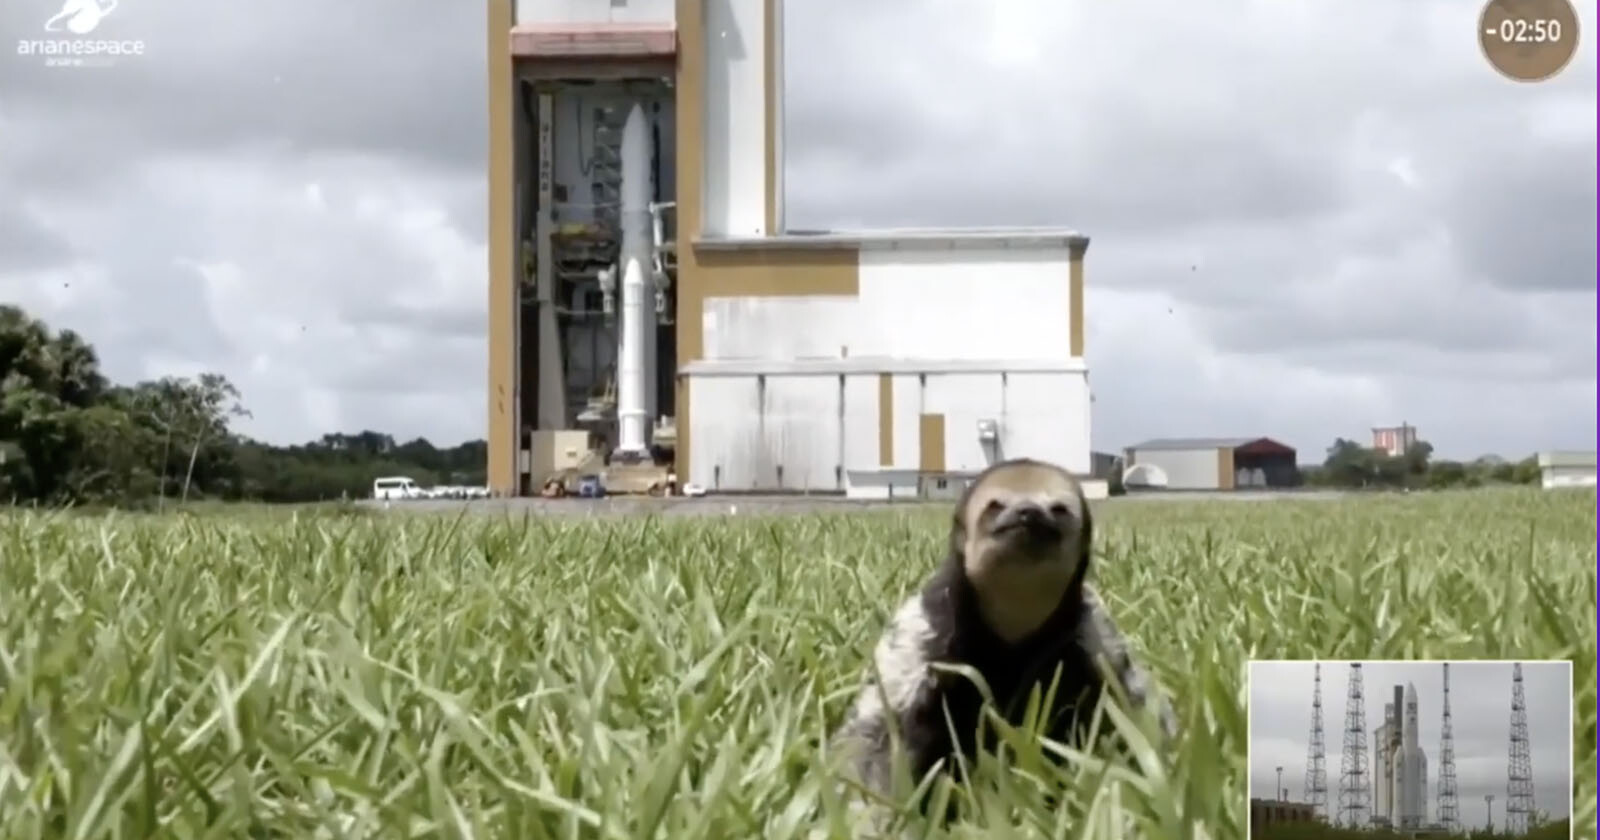  adorable sloth steals show photobombing rocket launch 